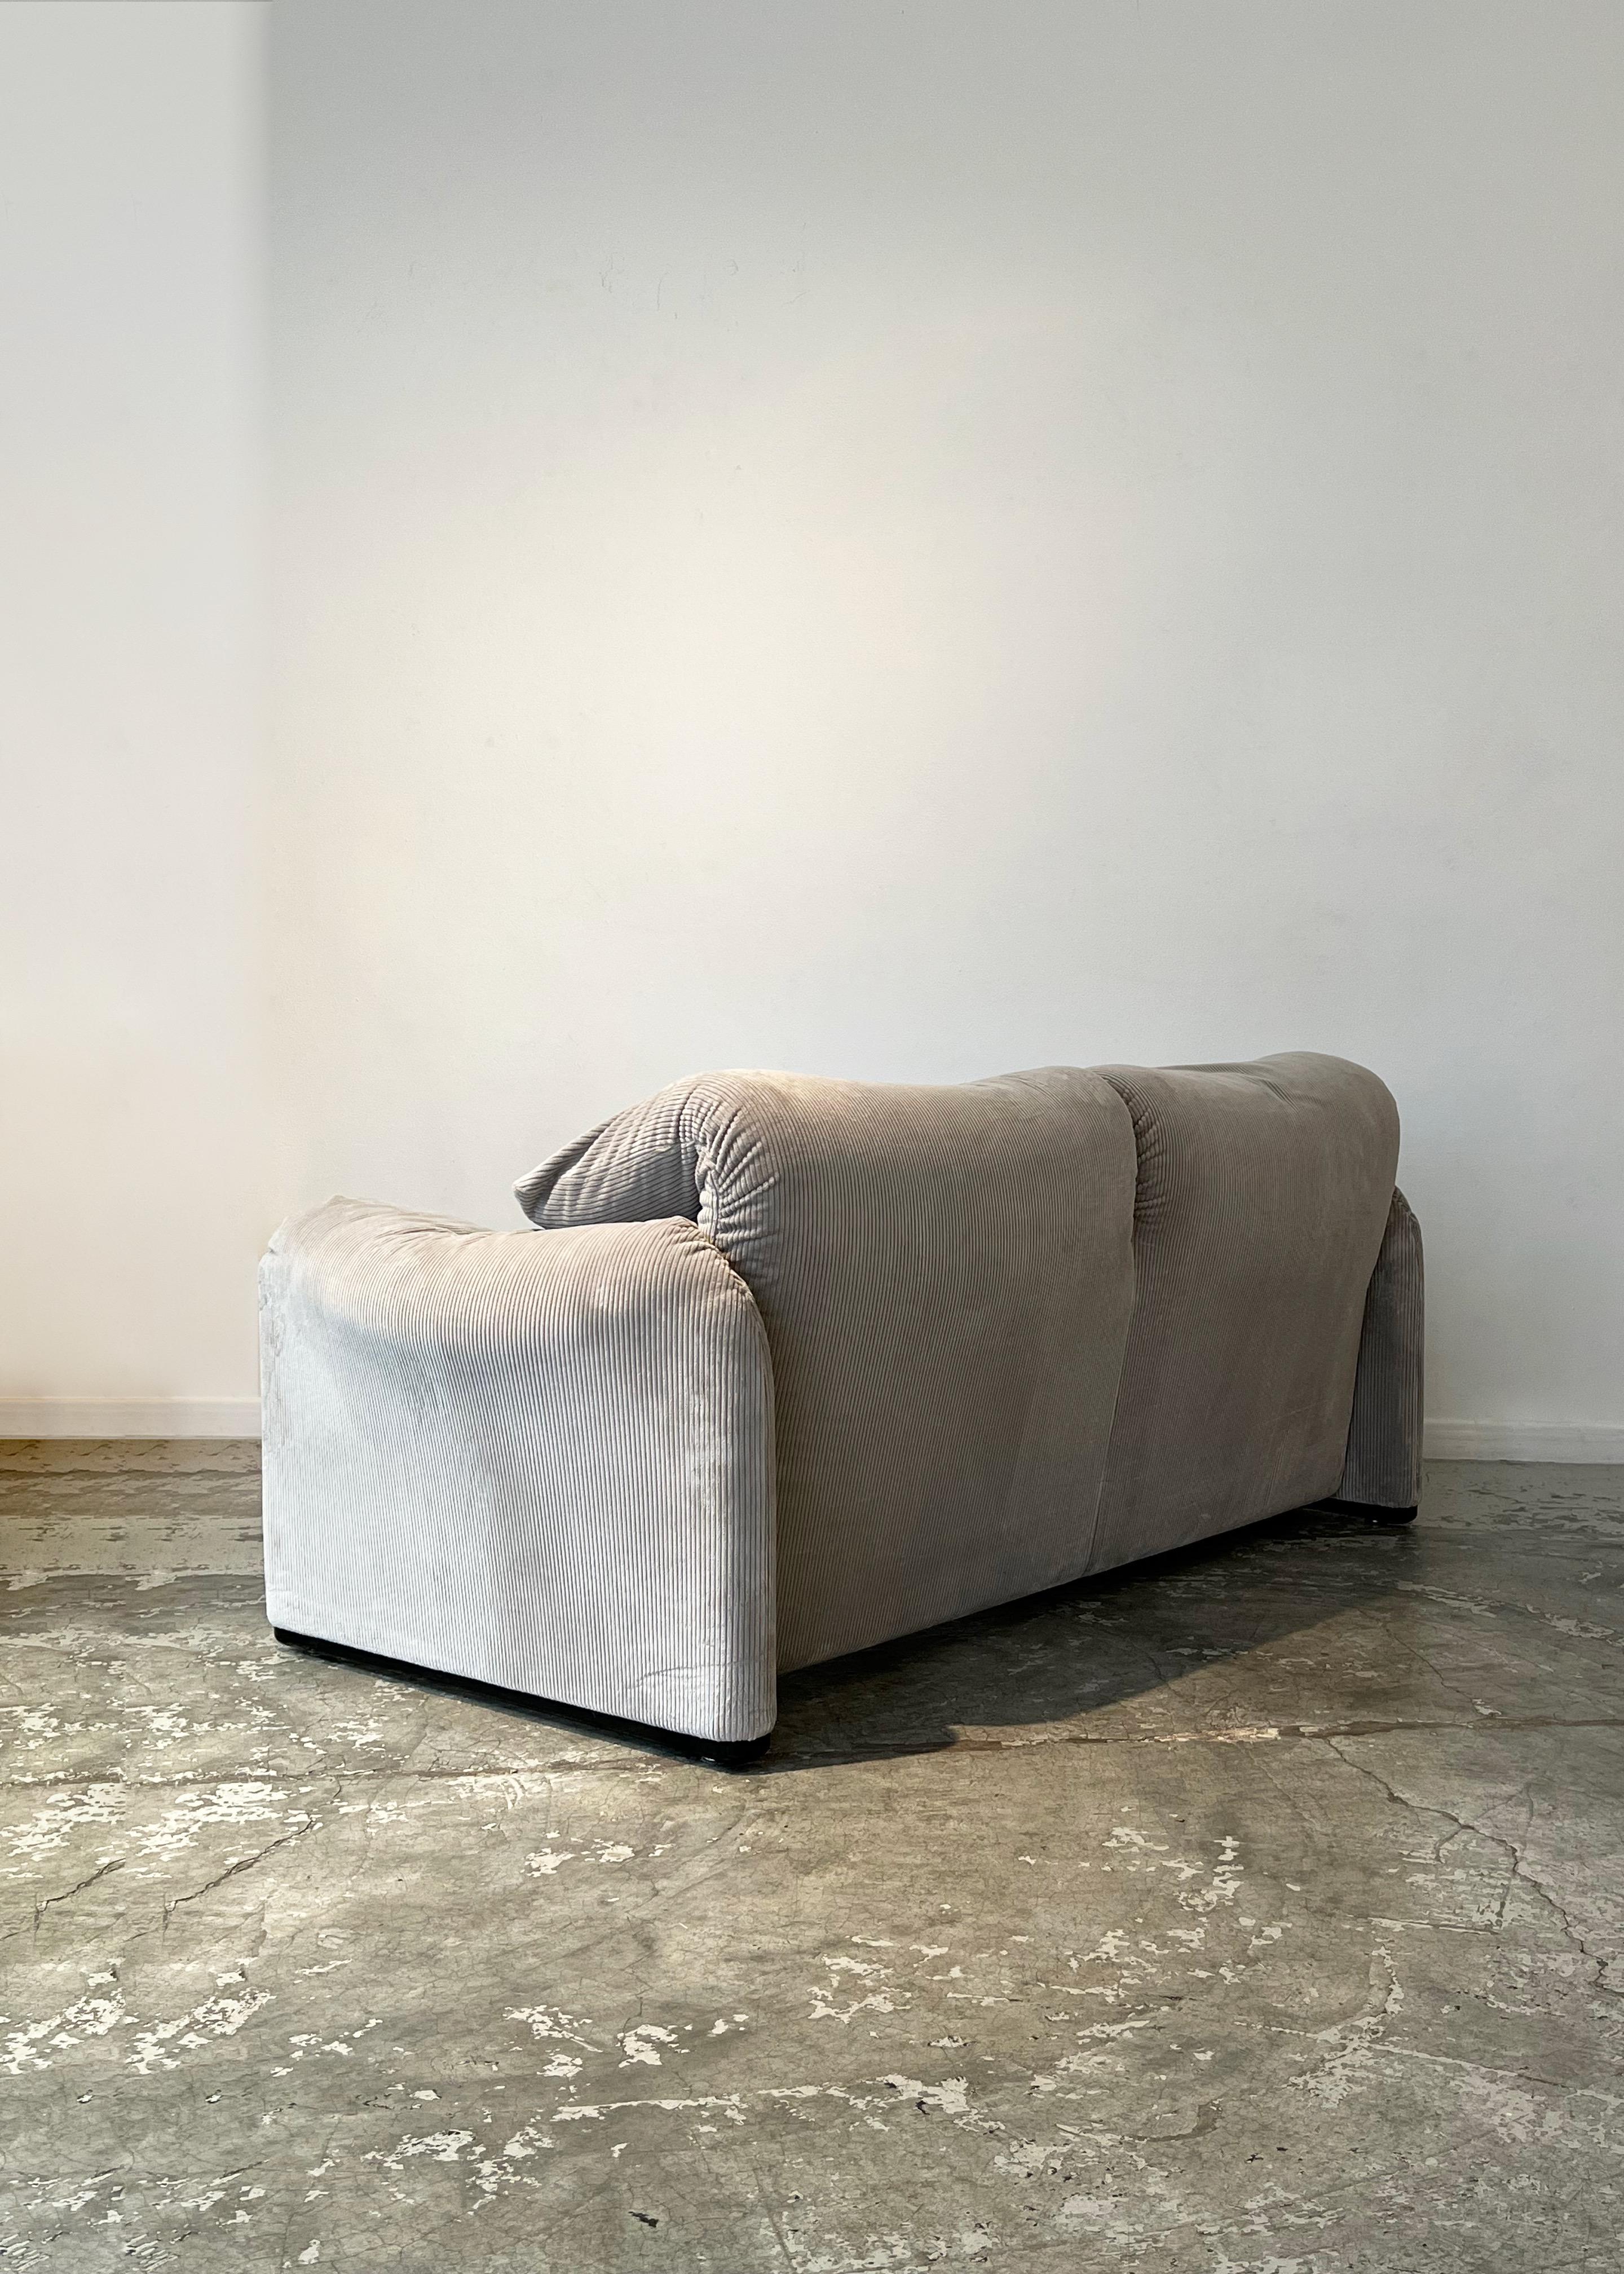 The Maralunga sofa was created in 1973 by Vico Magistretti for the Italian firm Cassina. Known for his creations using simple, essential forms and the use of innovative materials for that time, he engaged in numerous partnerships with the new